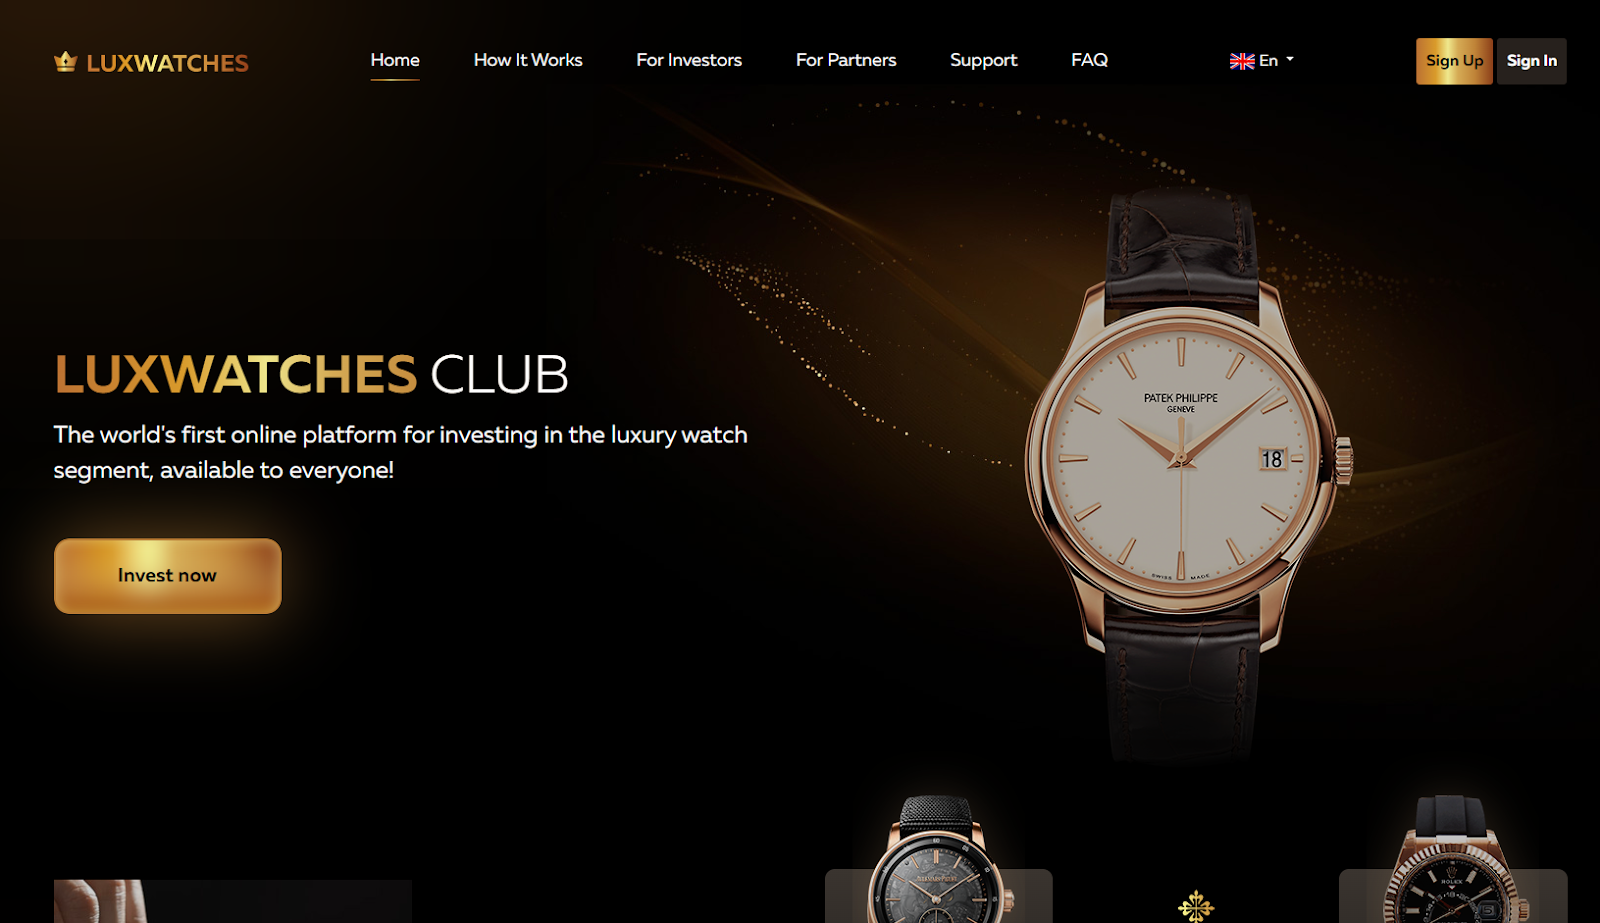 luxwatches.club review, luxwatches.club new hyip review,luxwatches.club scam or paying,luxwatches.club scam or legit,luxwatches.club full review details and status,luxwatches.club payout proof,luxwatches.club new hyip,luxwatches.club oxifinance hyip,new hyip,best hyip,legit hyip,top hyip,hourly paying hyip,long term paying hyip,instant paying hyip,best investment project